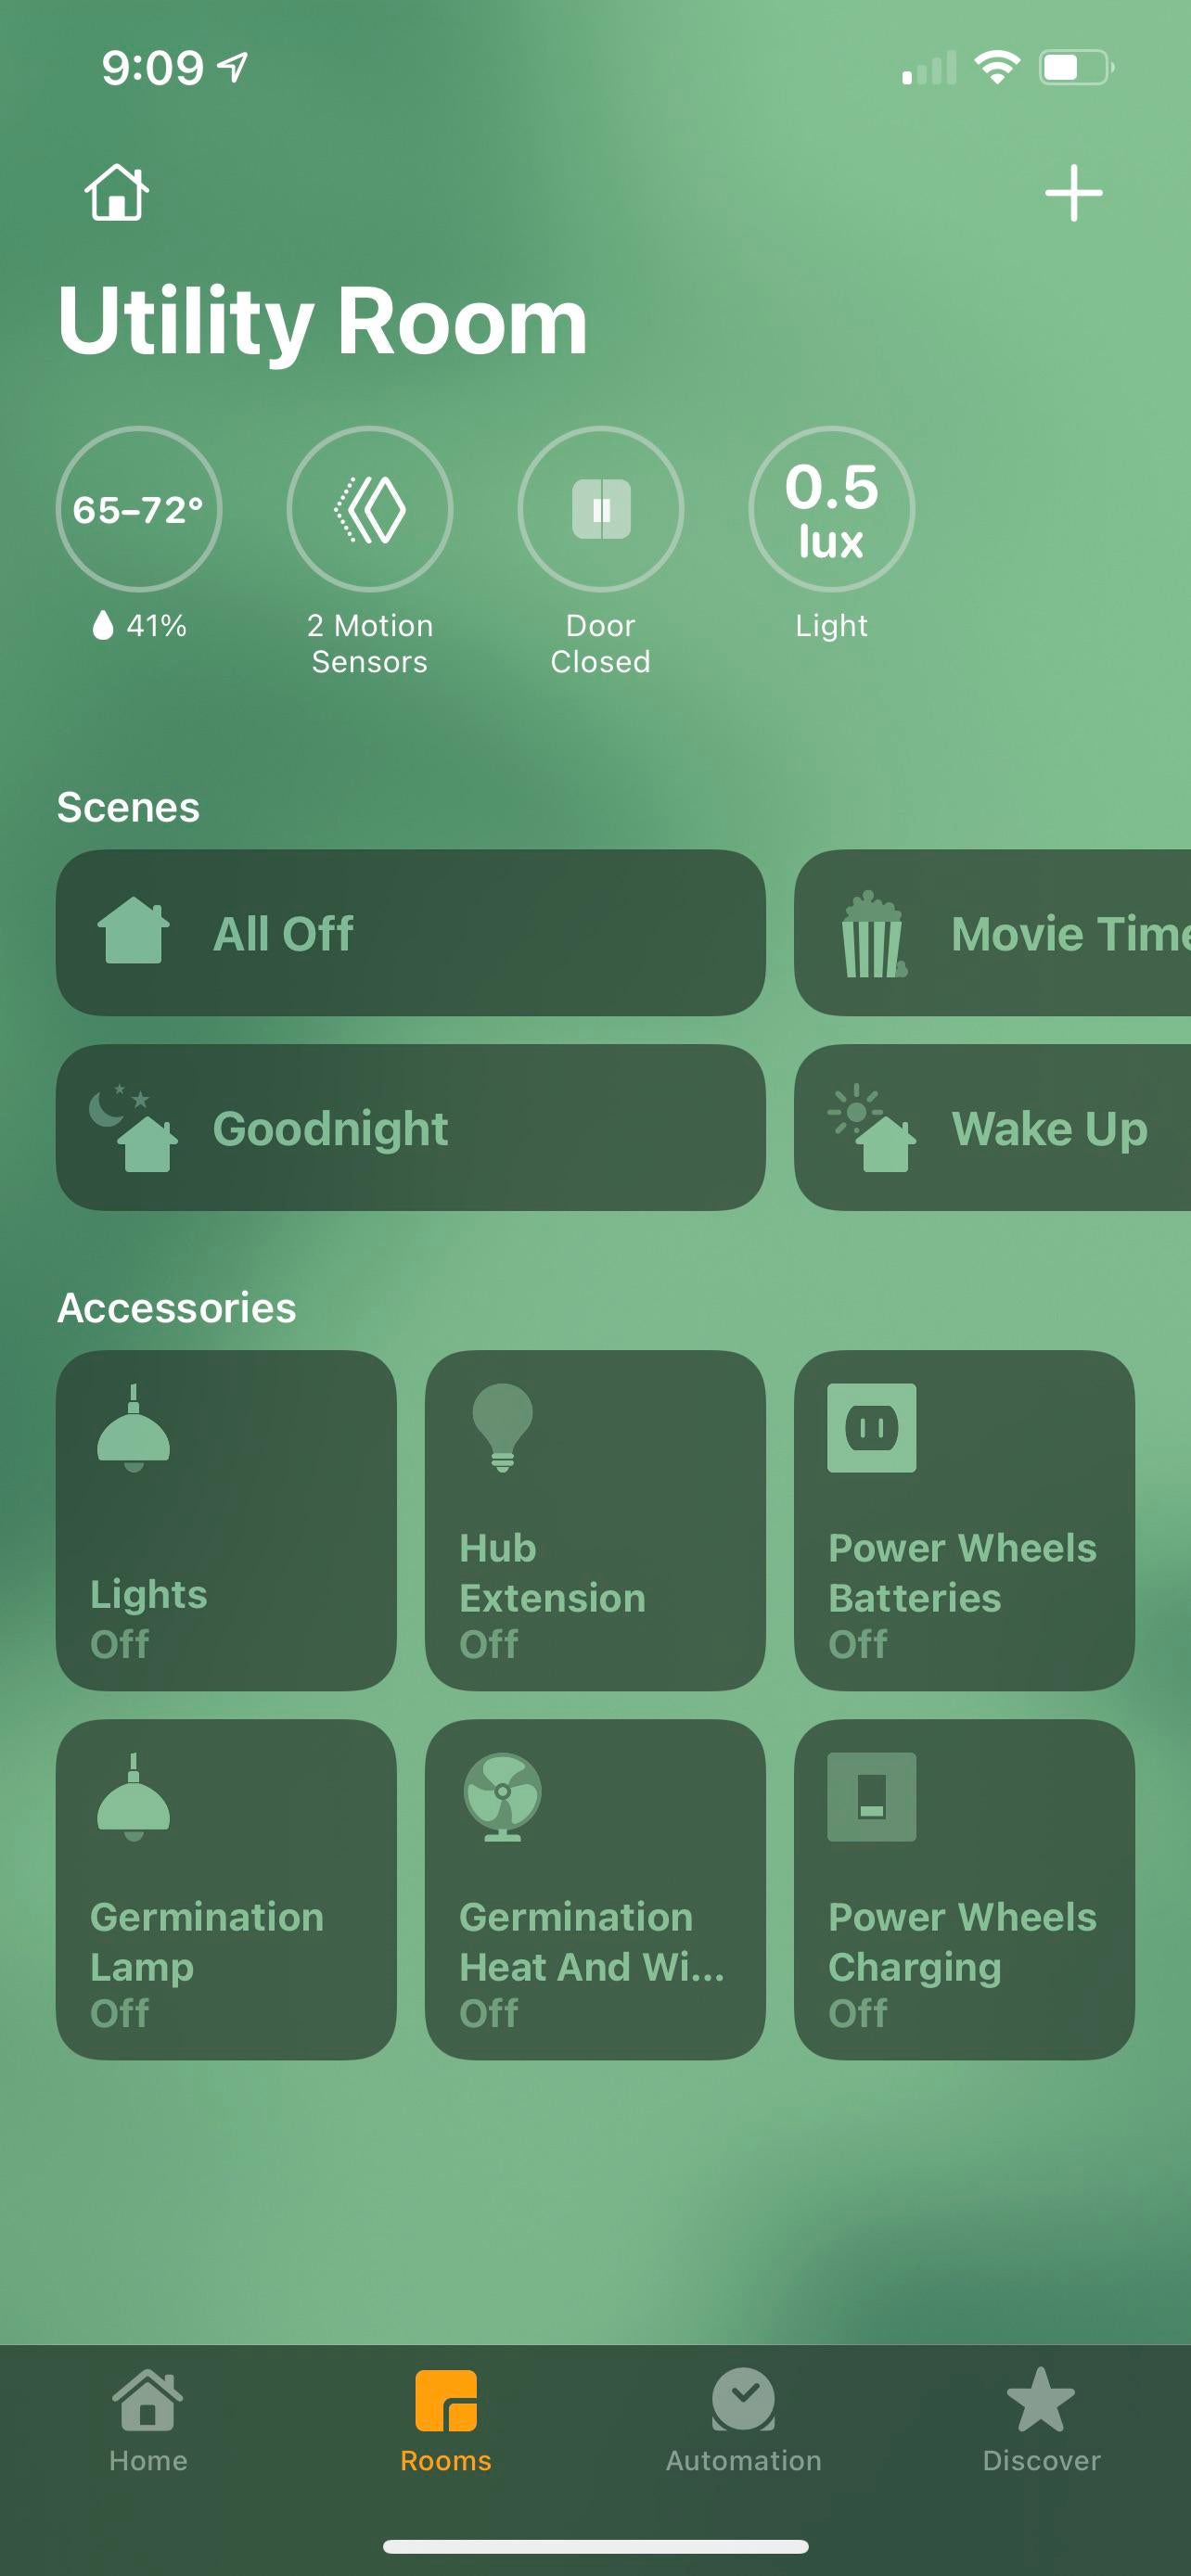 HomeKit backgrounds continue to change to this green background after